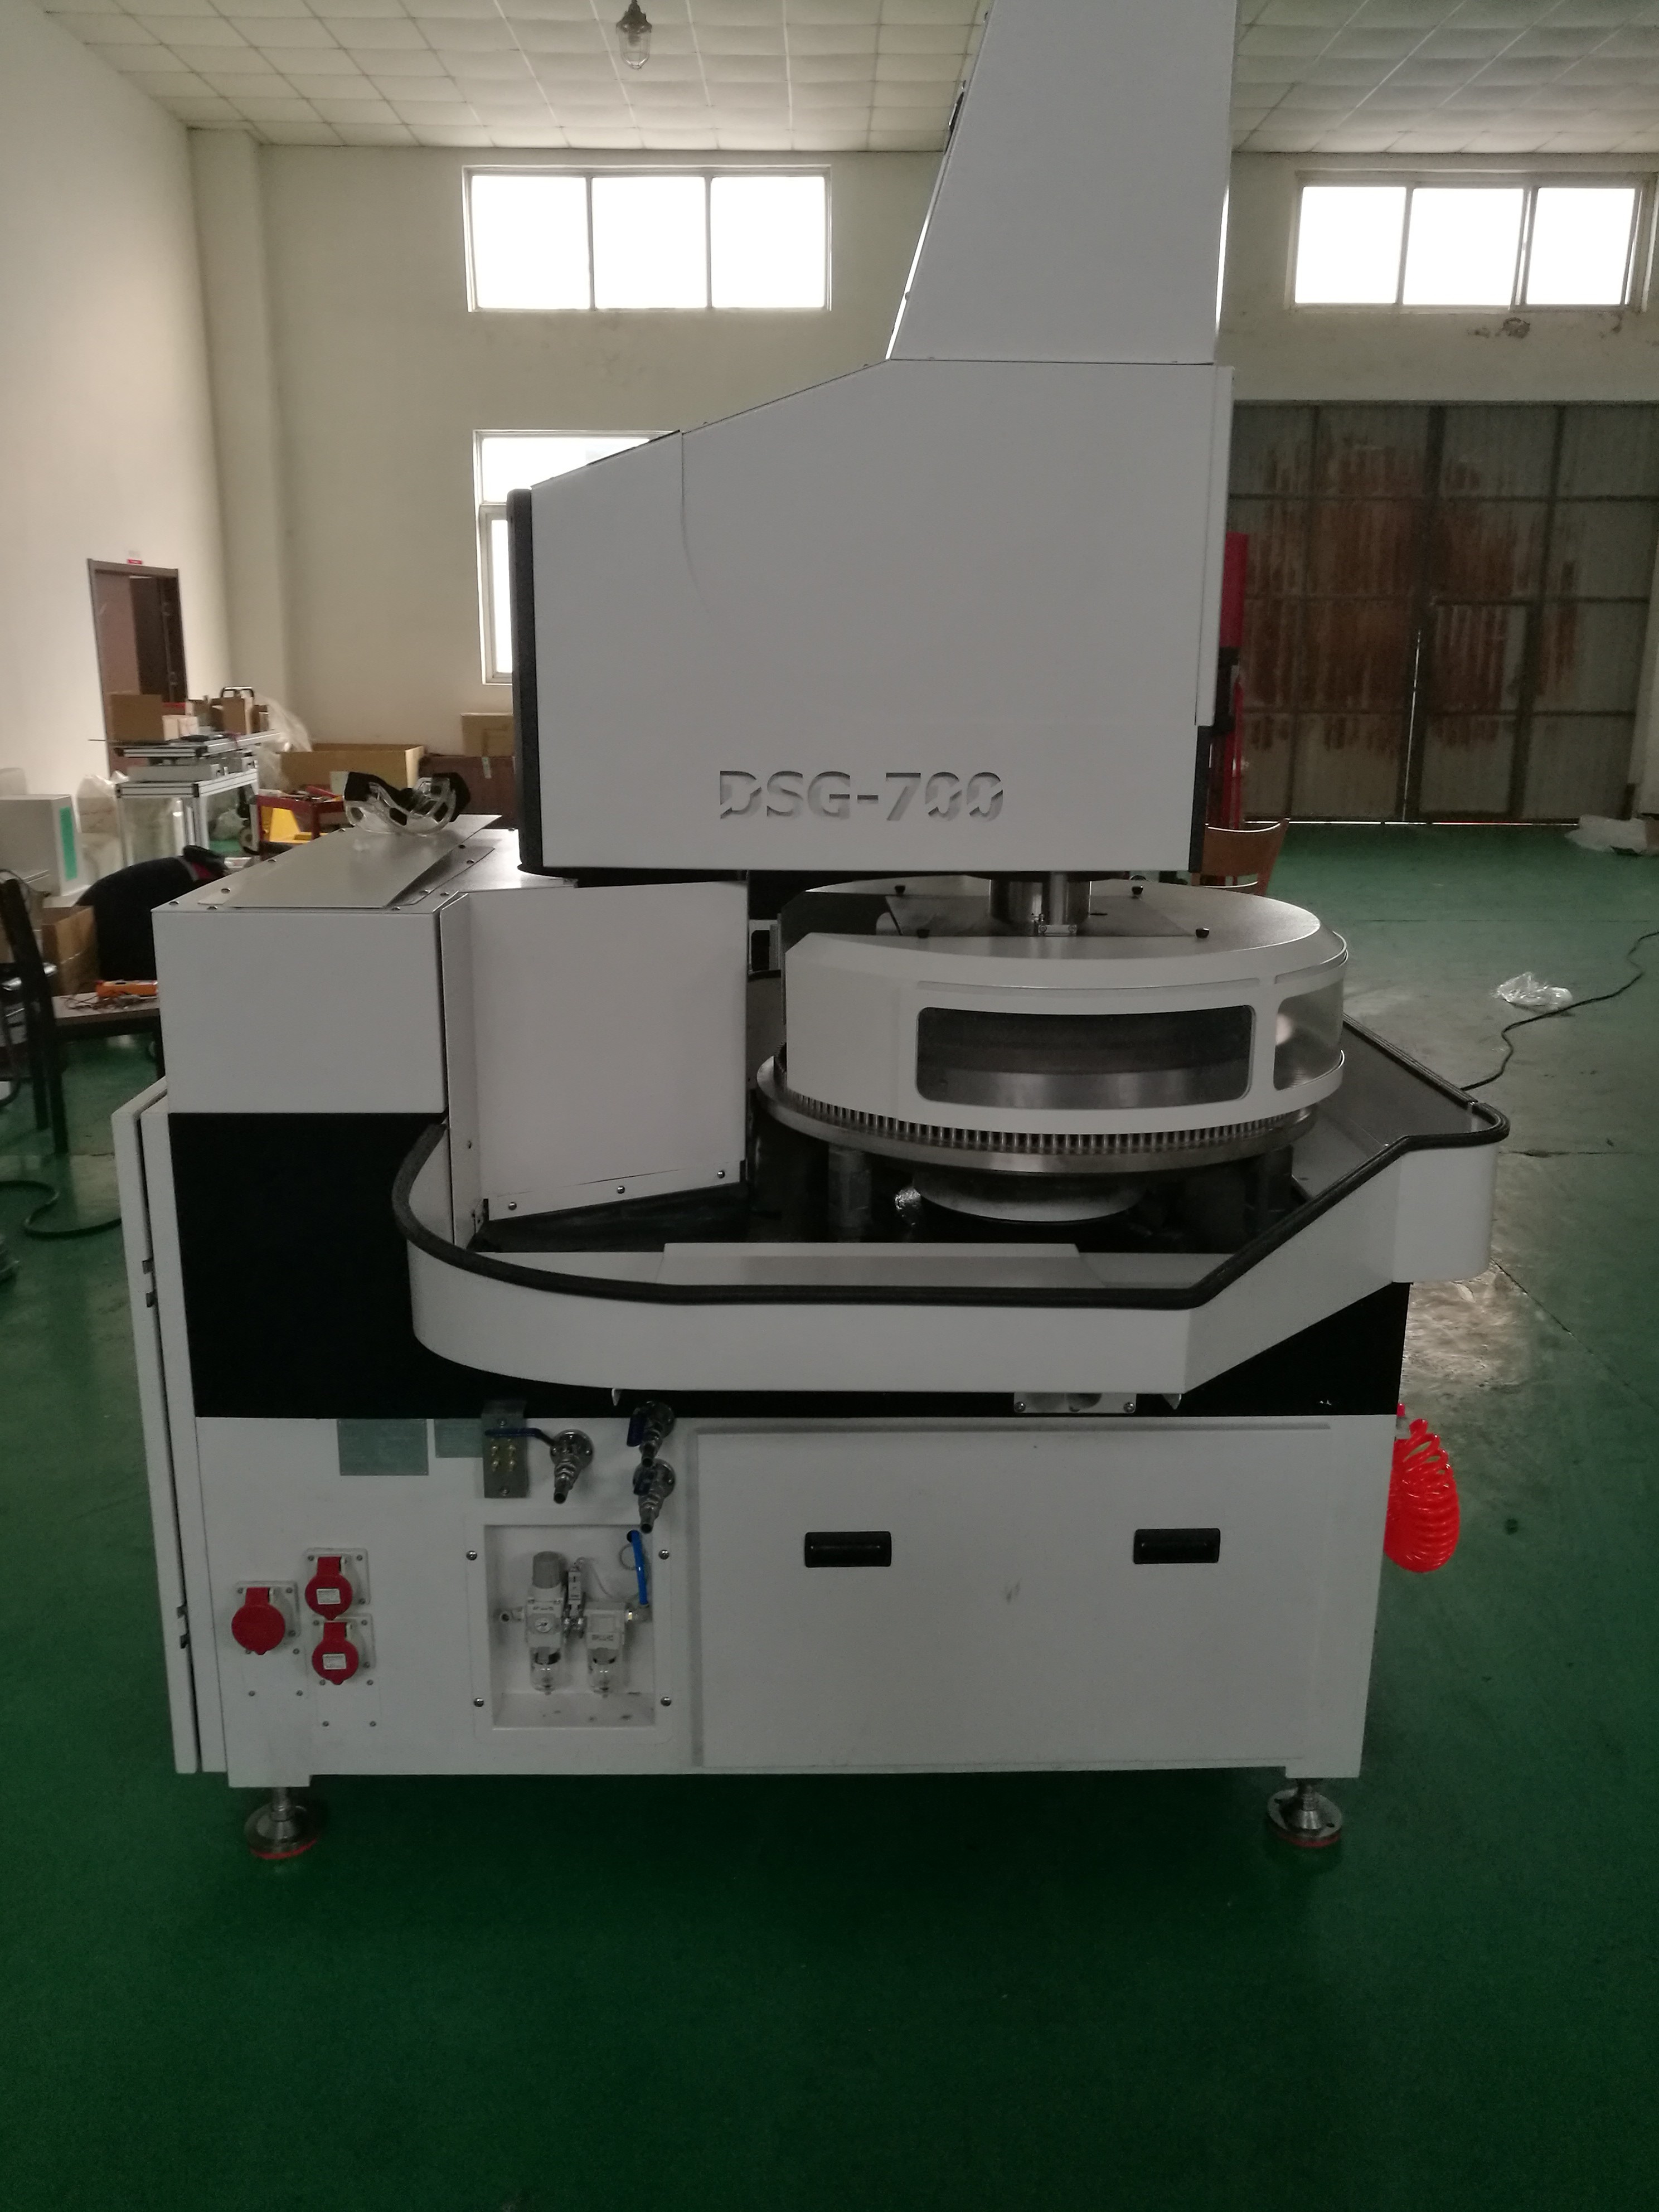 Double side metal, ceramic, glass surface grinding machine DSG-700 industrial usage Korean technology support China made